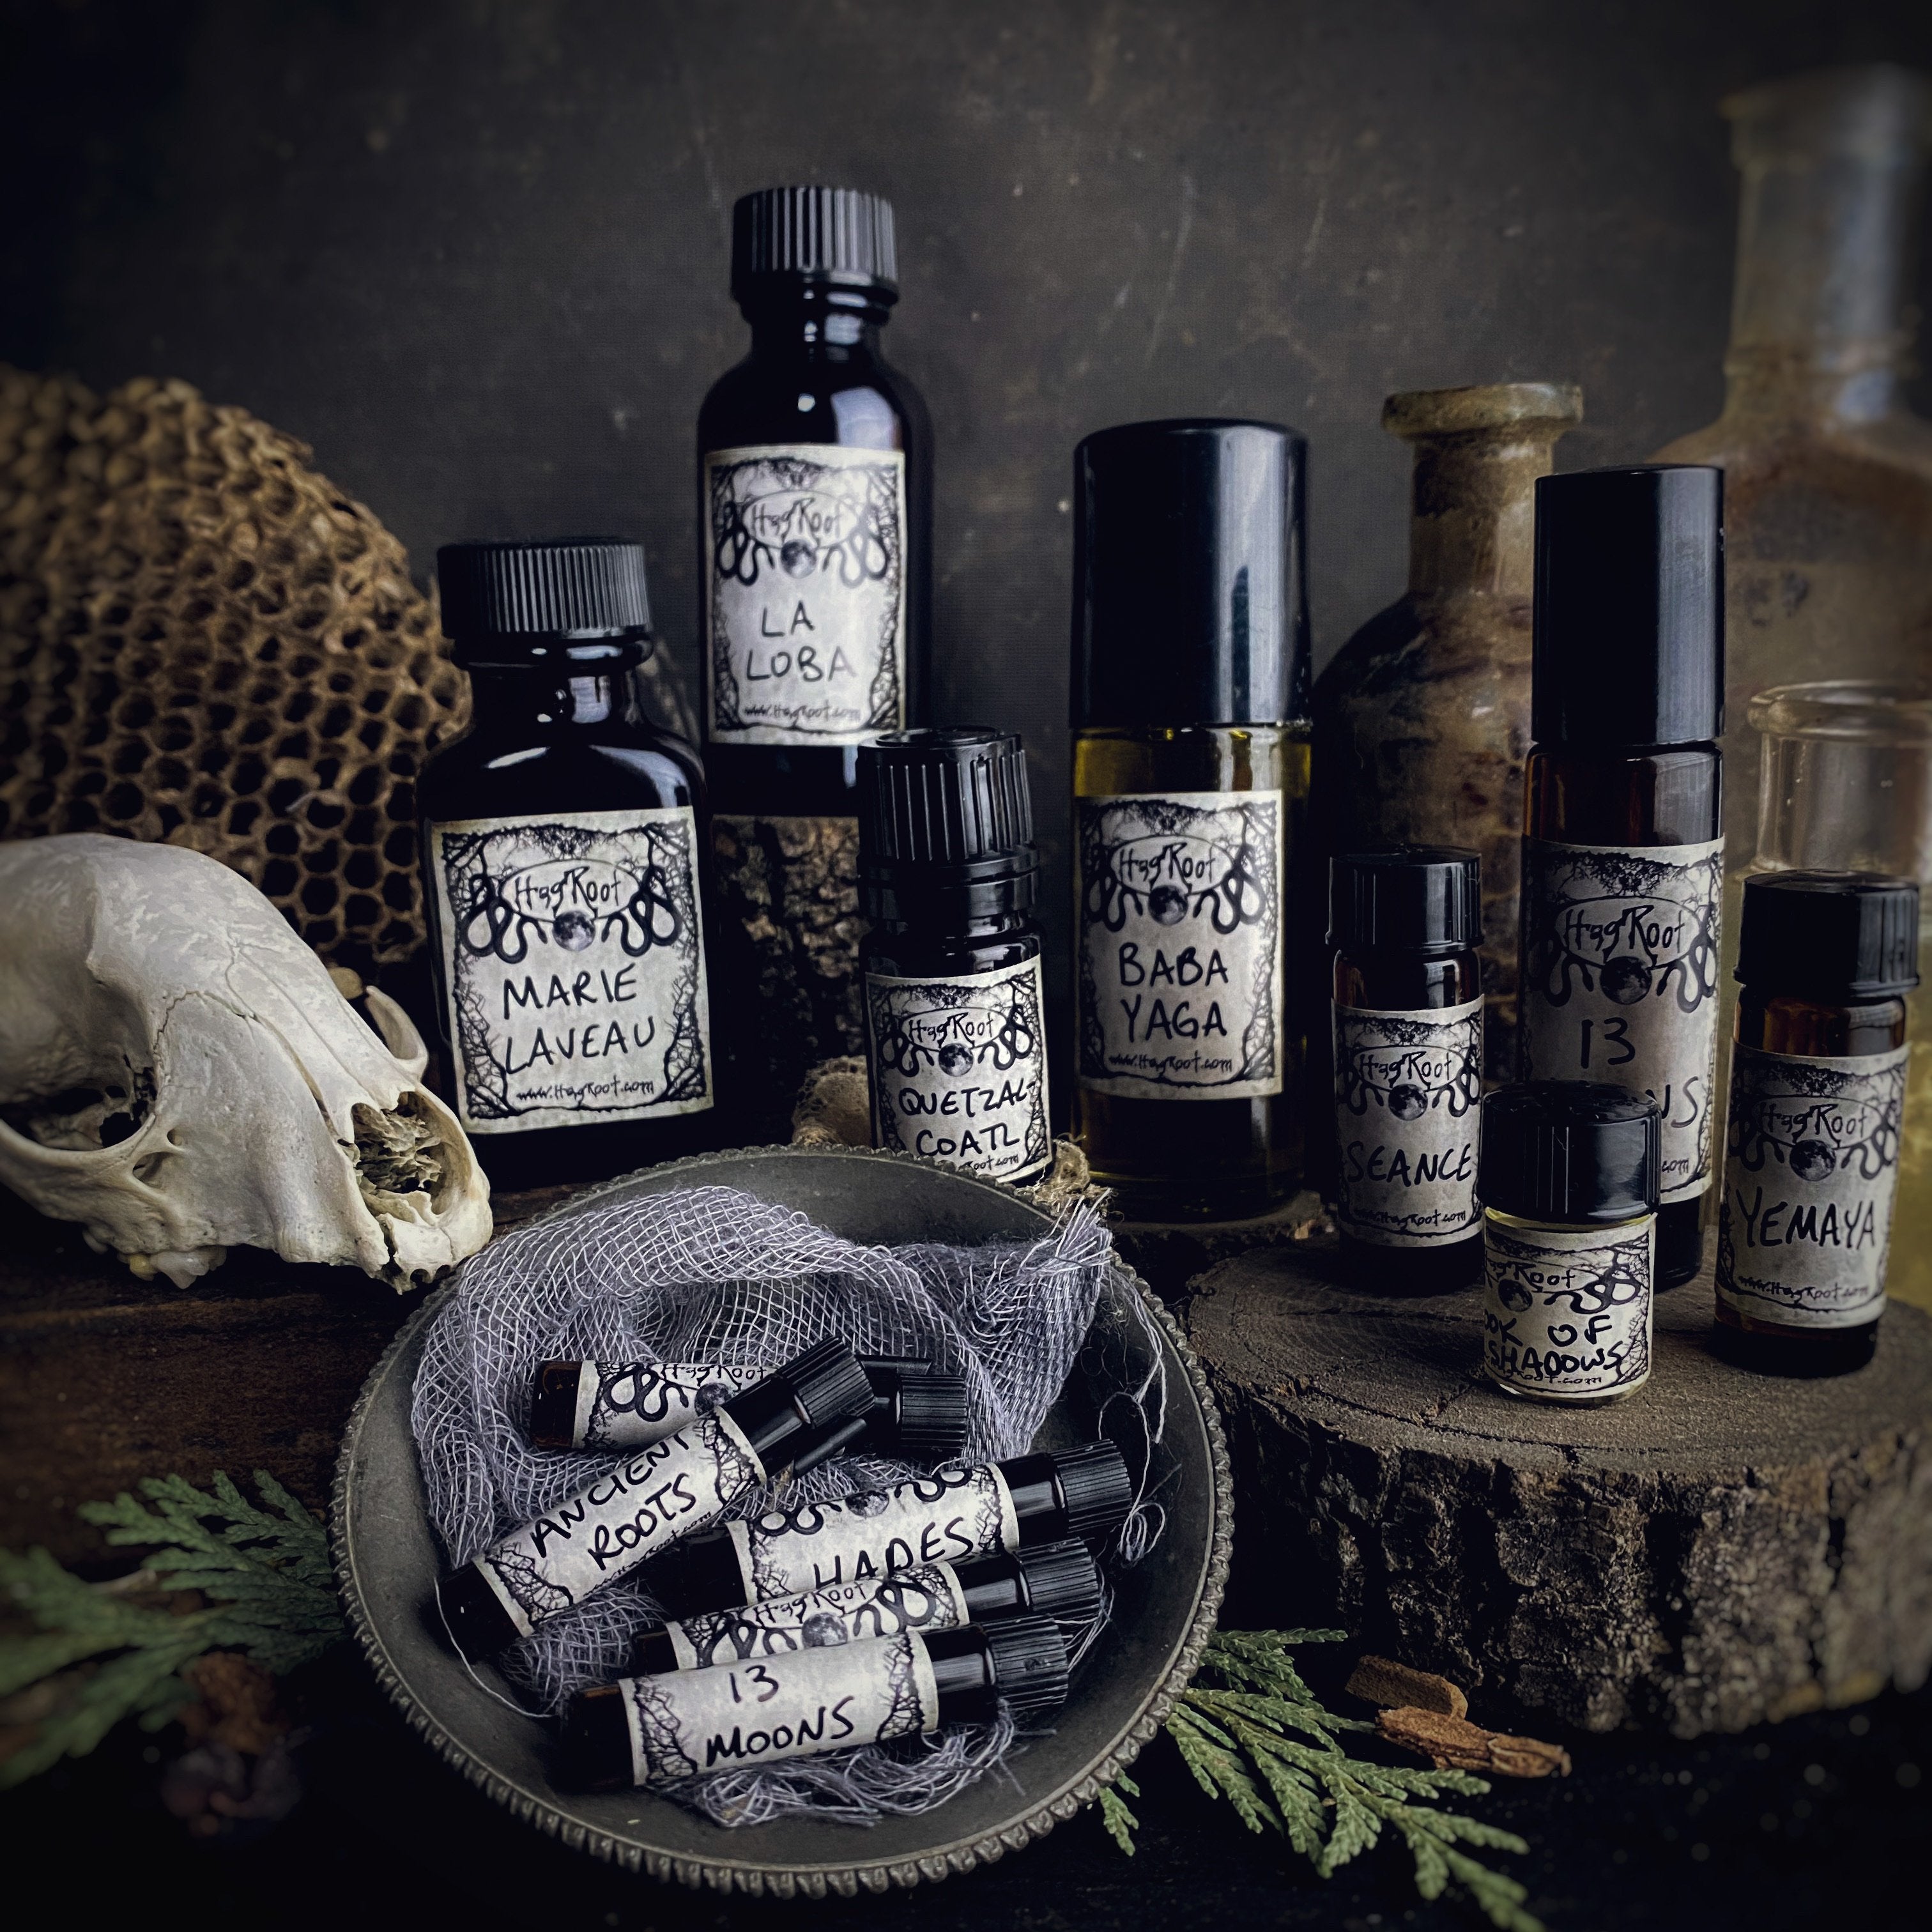 SWAMP WITCH-(Spanish Moss, Sandalwood, Pinion Wood, Tobacco, Labdanum, Patchouli, Cedar)-Perfume, Cologne, Anointing, Ritual Oil